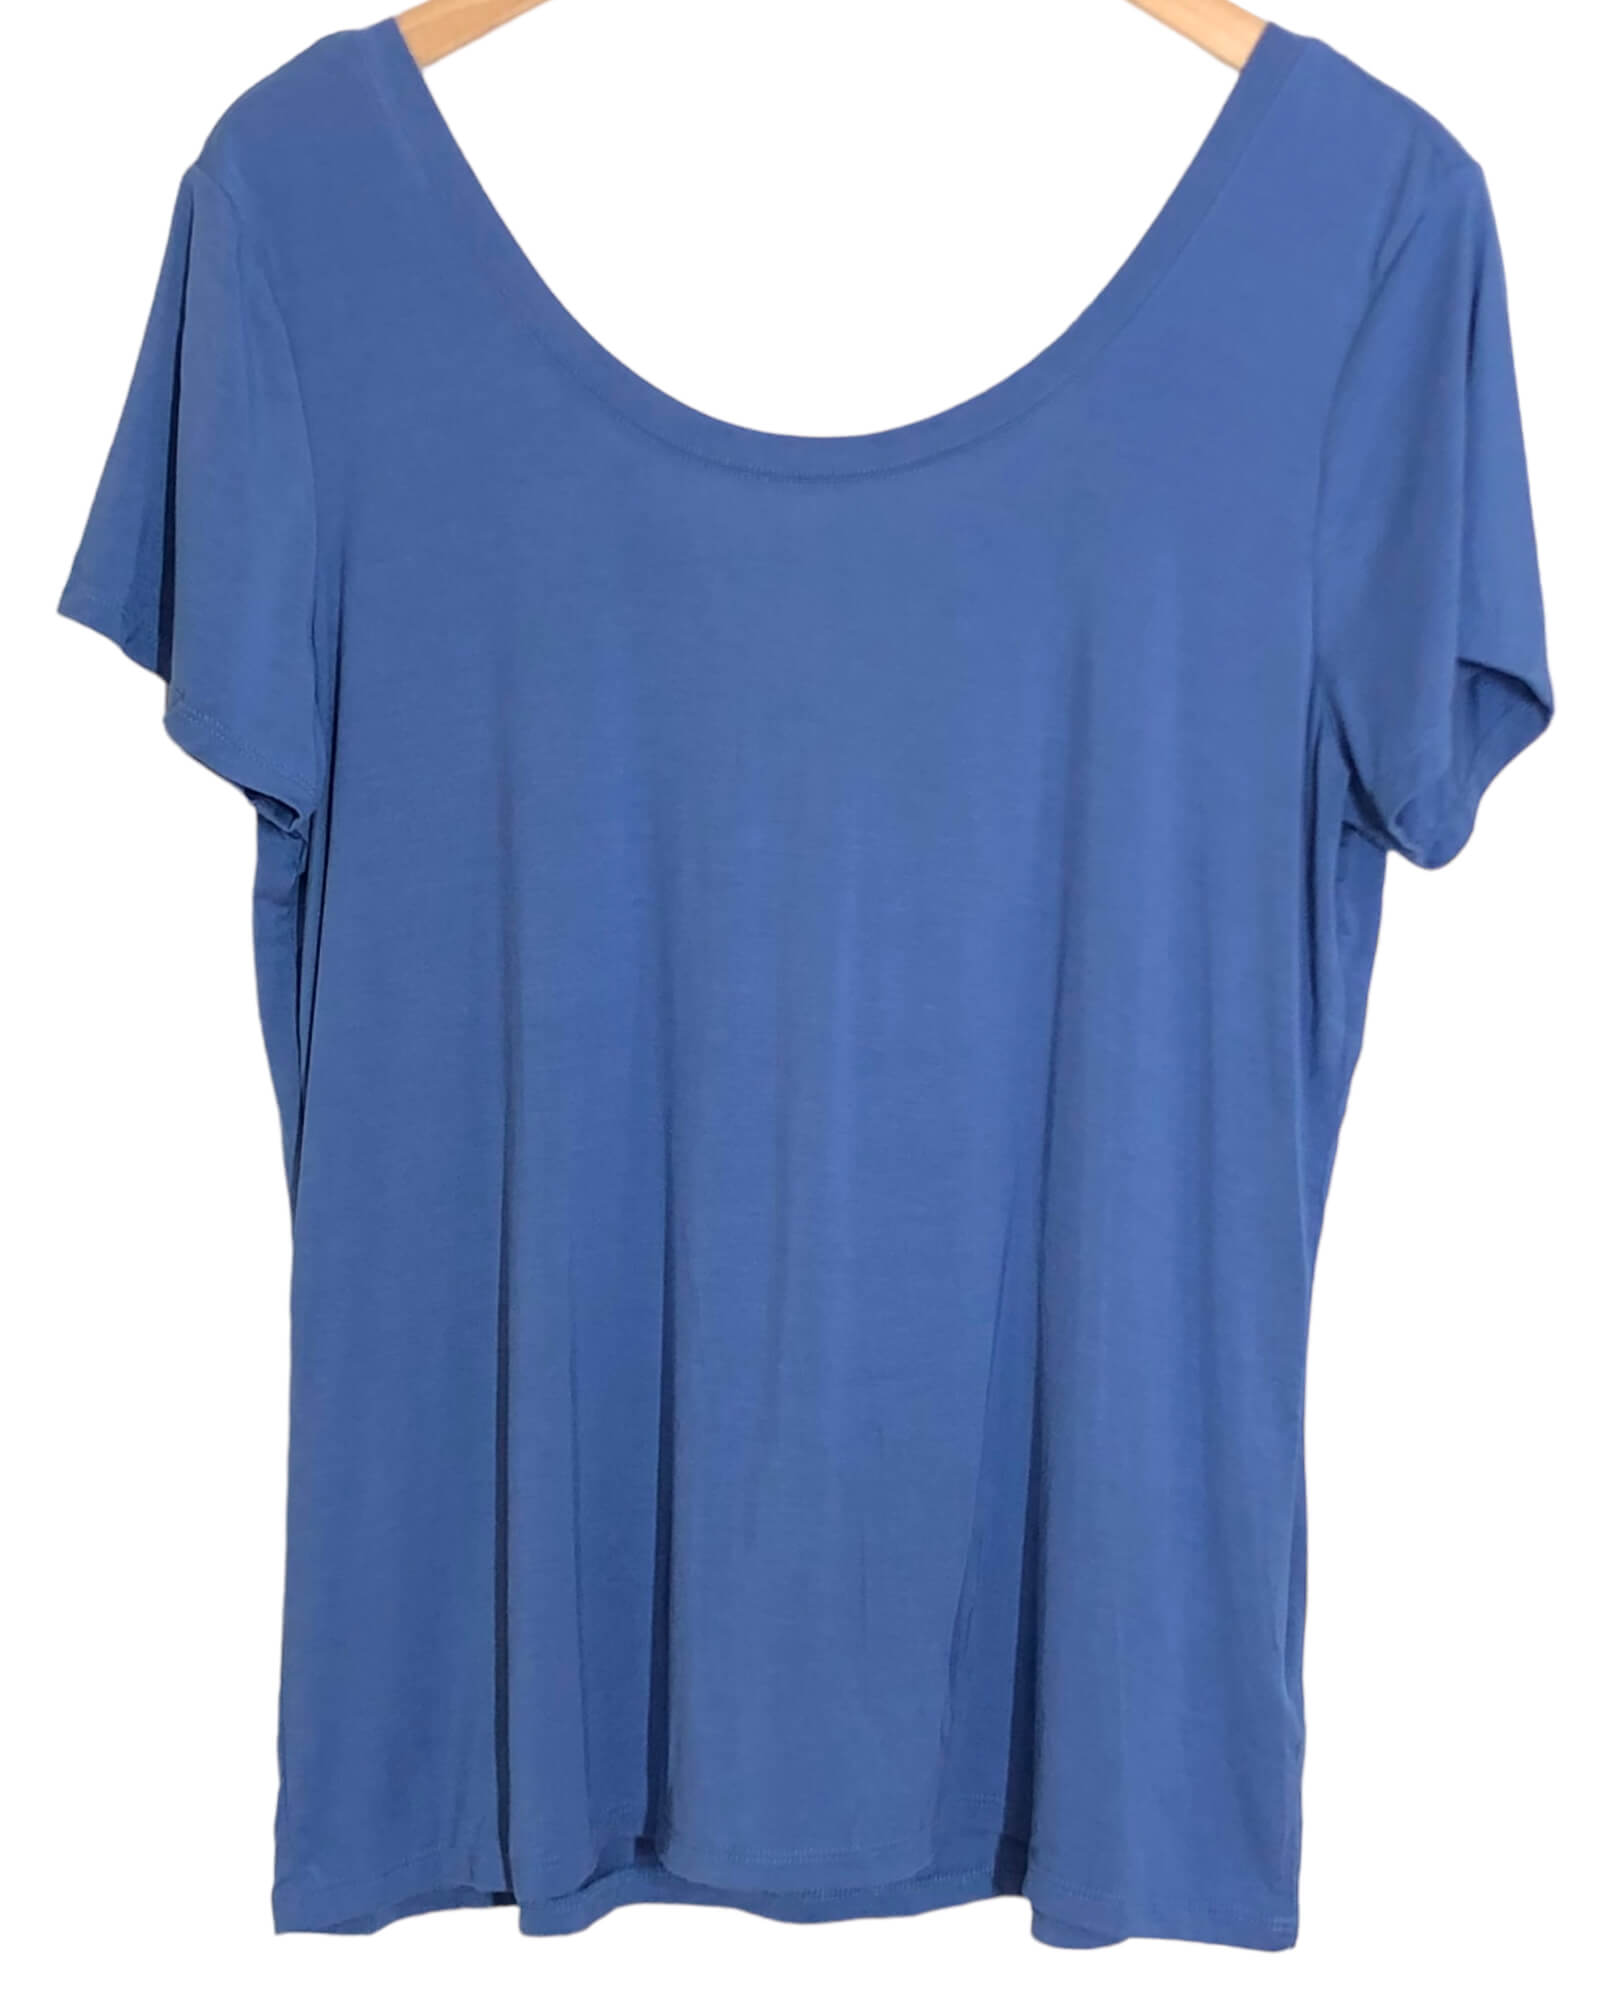 Cool Summer CABLE AND GAUGE blue scoop neck t-shirt tee